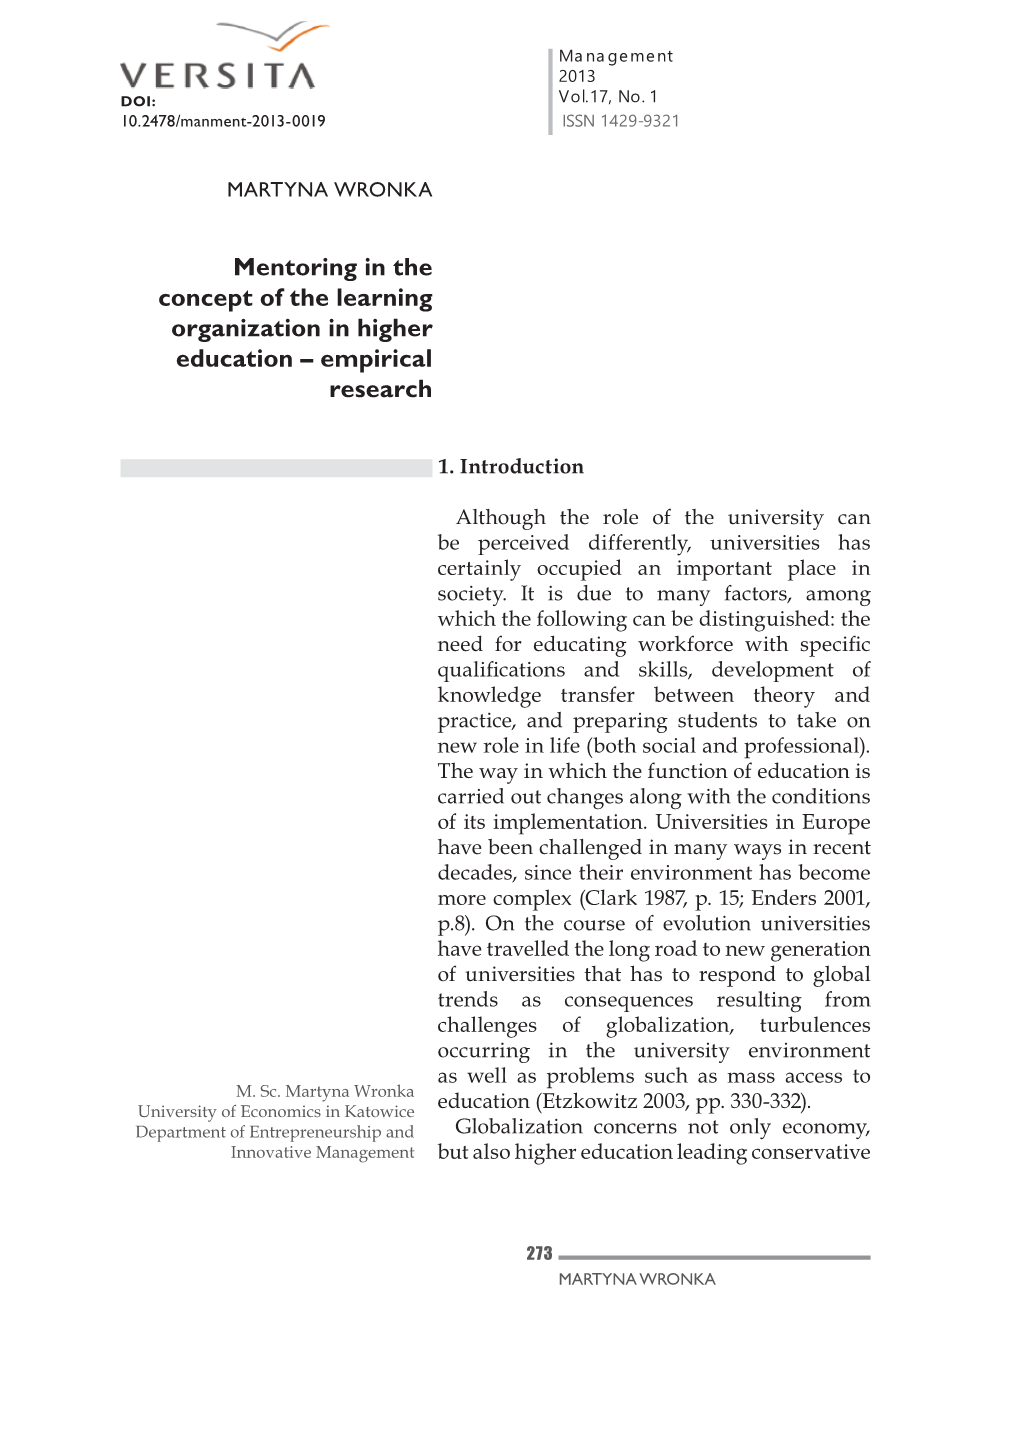 Mentoring in the Concept of the Learning Organization in Higher Education – Empirical Research